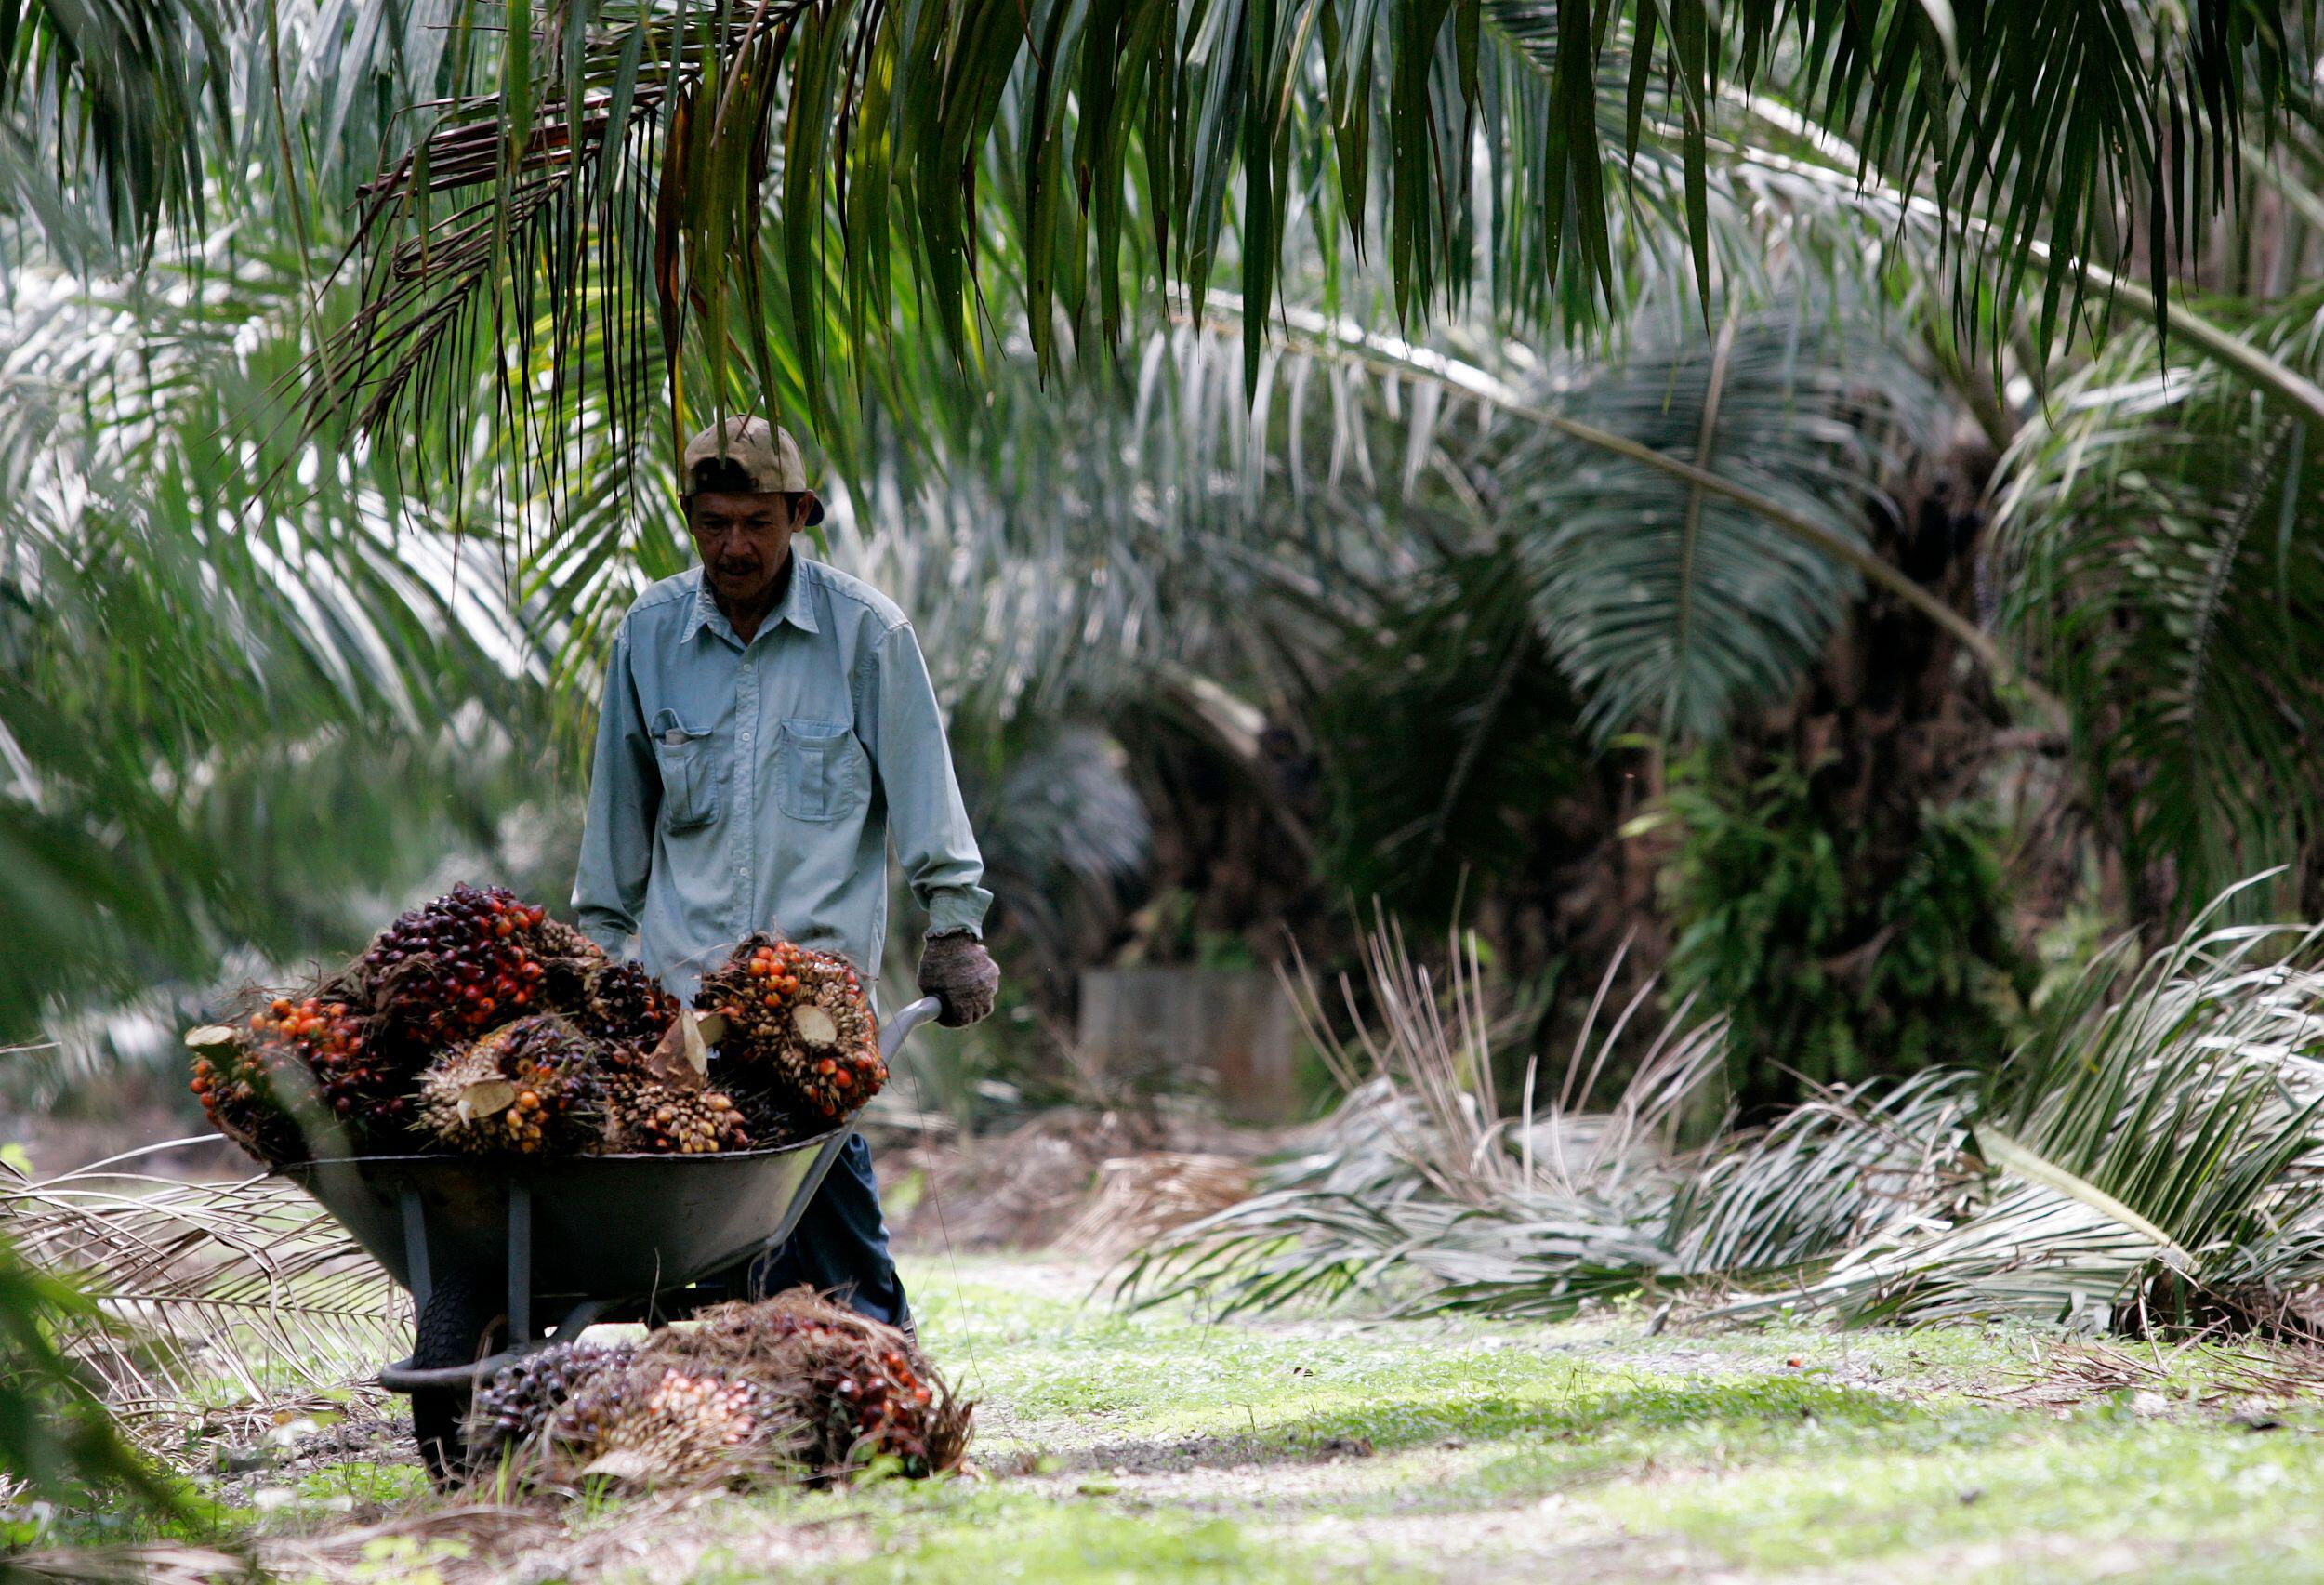 A worker pushes a wheelbarrow of palm oil fruits on a plantation in Malaysia. Although palm oil is one of the most widely traded and used commodities, its production is linked to environmental and social problems, prompting calls to make the supply chain more sustainable. (Image: Zainal Abd Halim / Alamy)